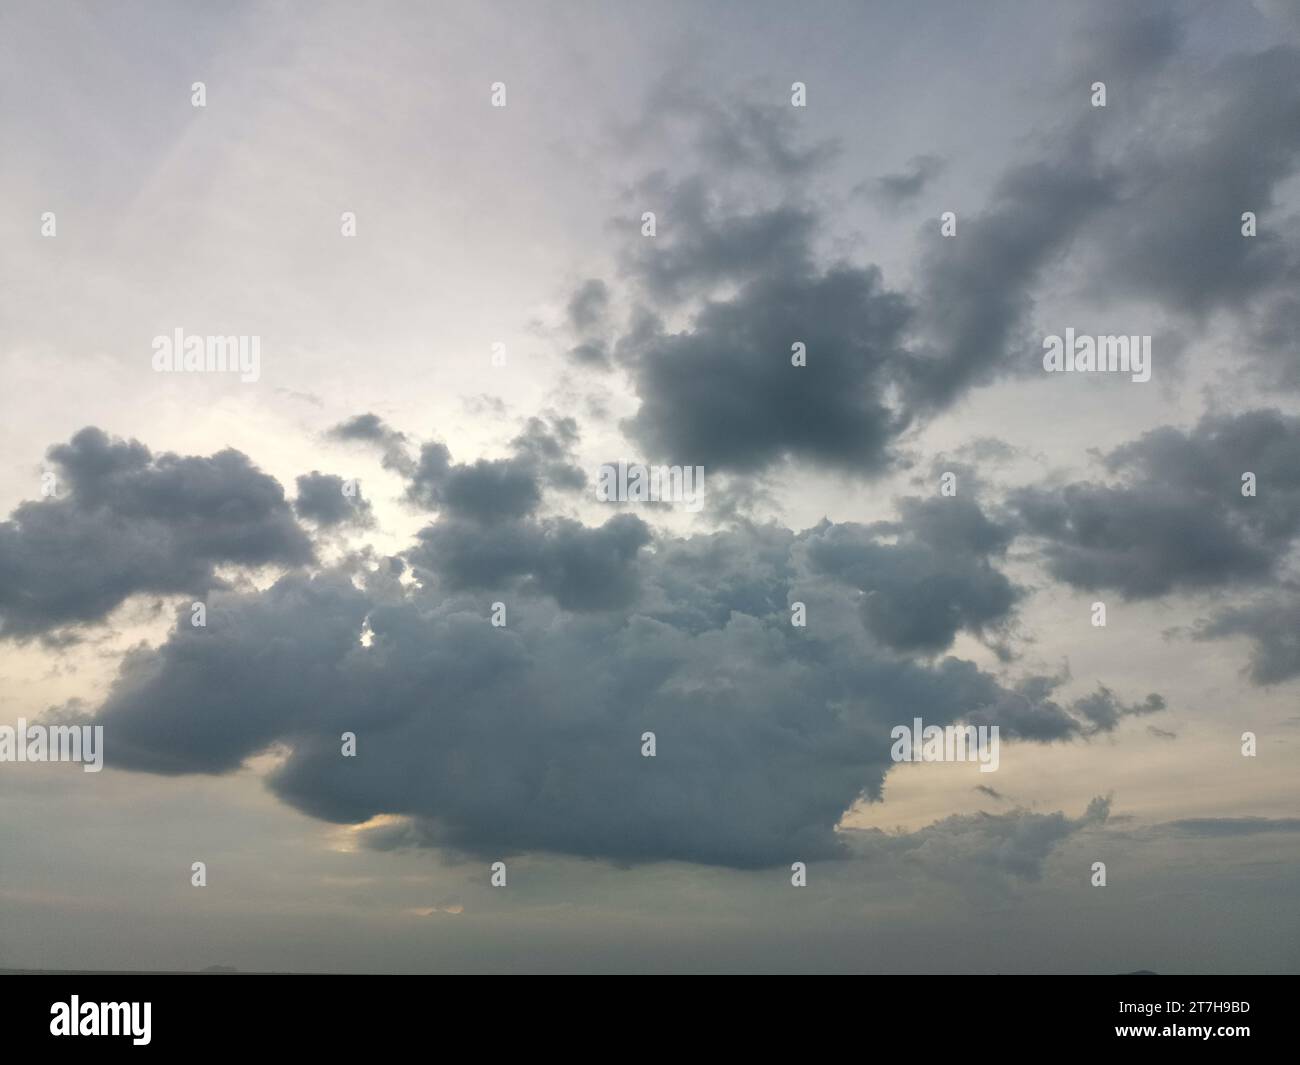 Evening dramatic sky with clouds Stock Photo